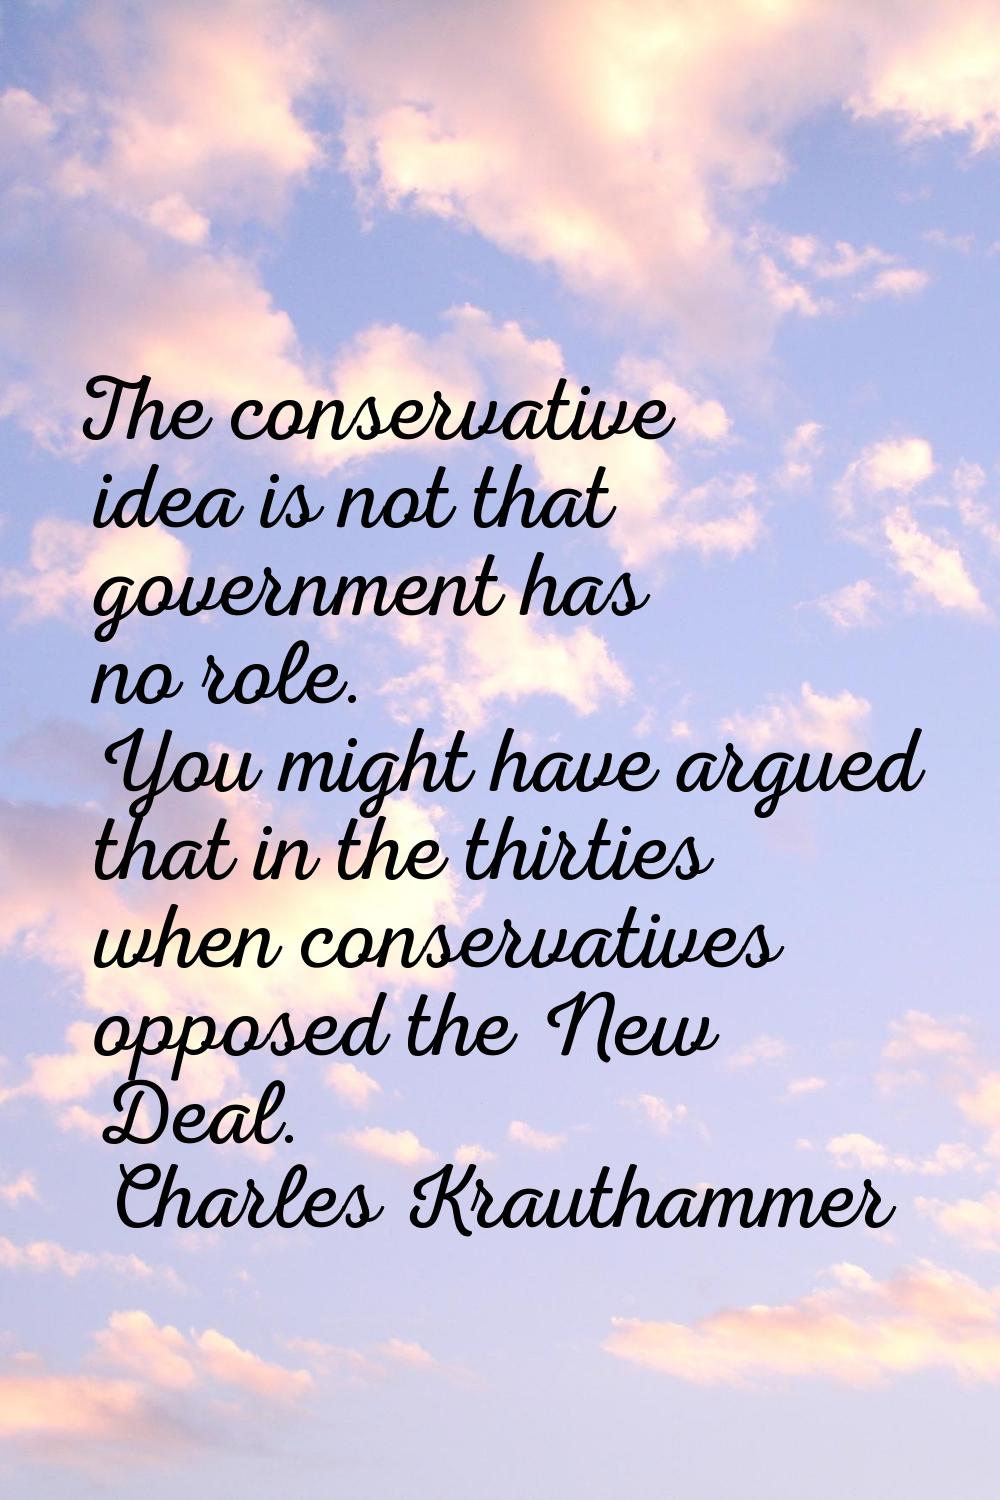 The conservative idea is not that government has no role. You might have argued that in the thirtie